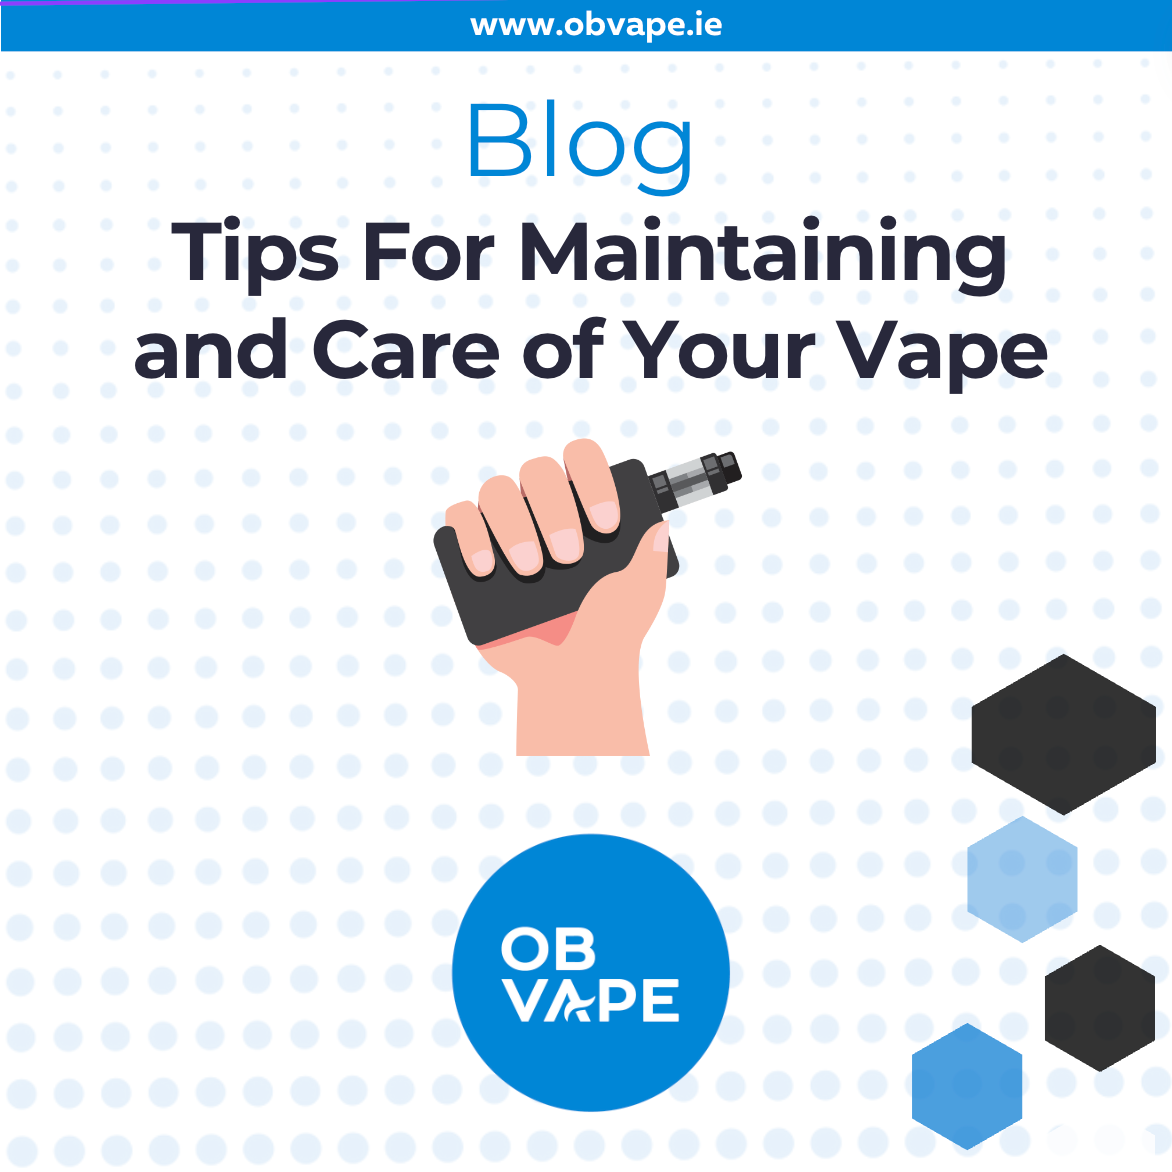 Tips For Maintaining and Care of Your Vape